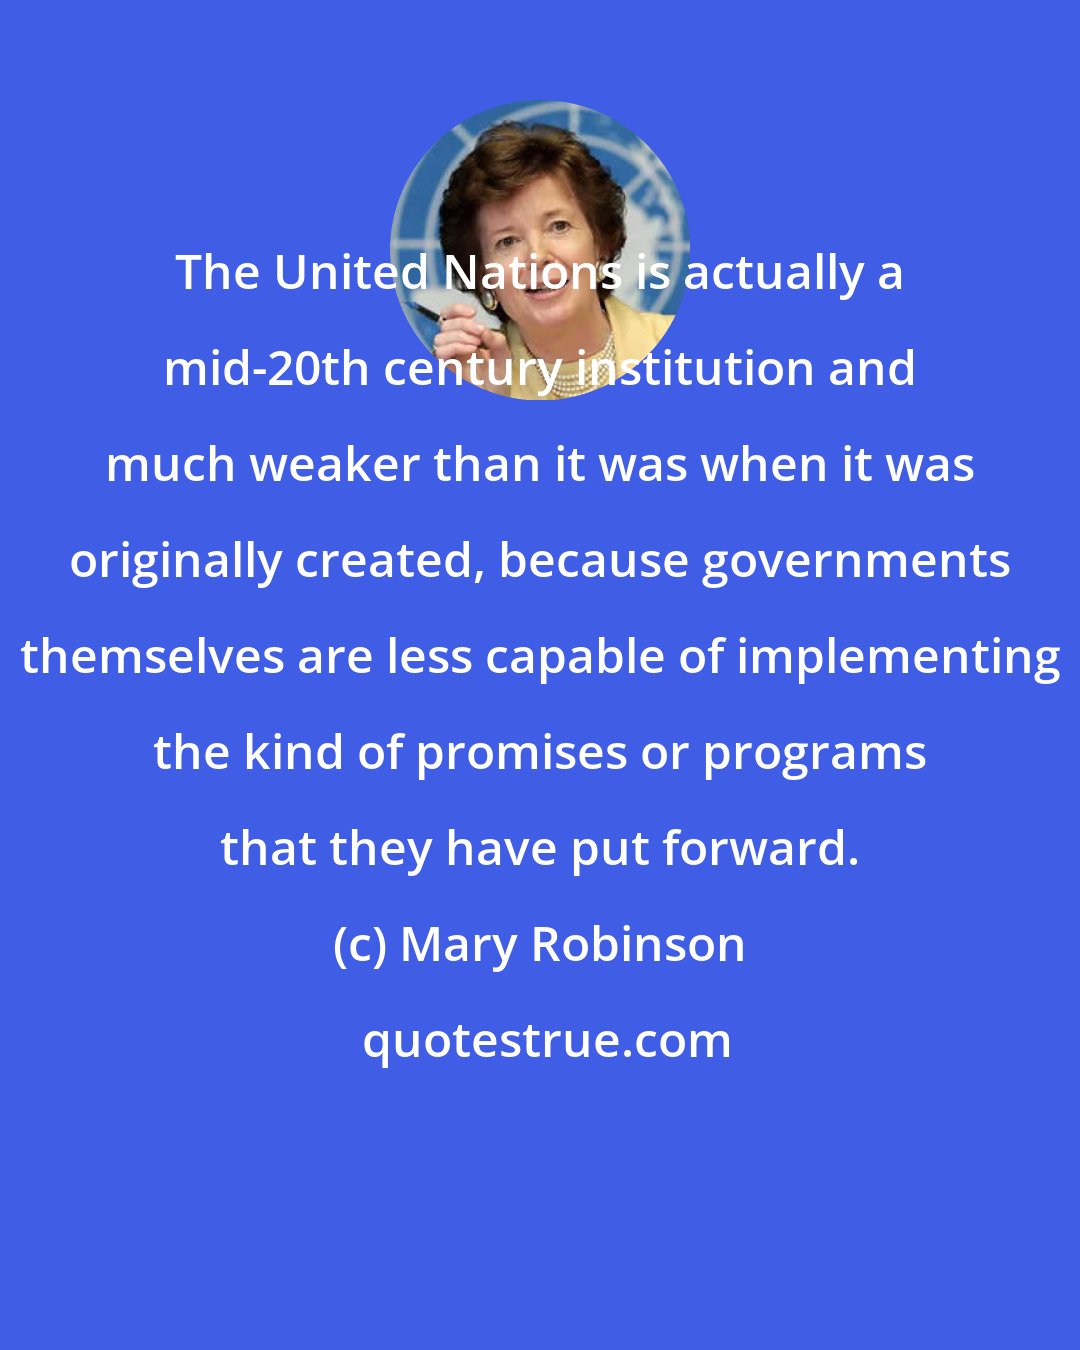 Mary Robinson: The United Nations is actually a mid-20th century institution and much weaker than it was when it was originally created, because governments themselves are less capable of implementing the kind of promises or programs that they have put forward.